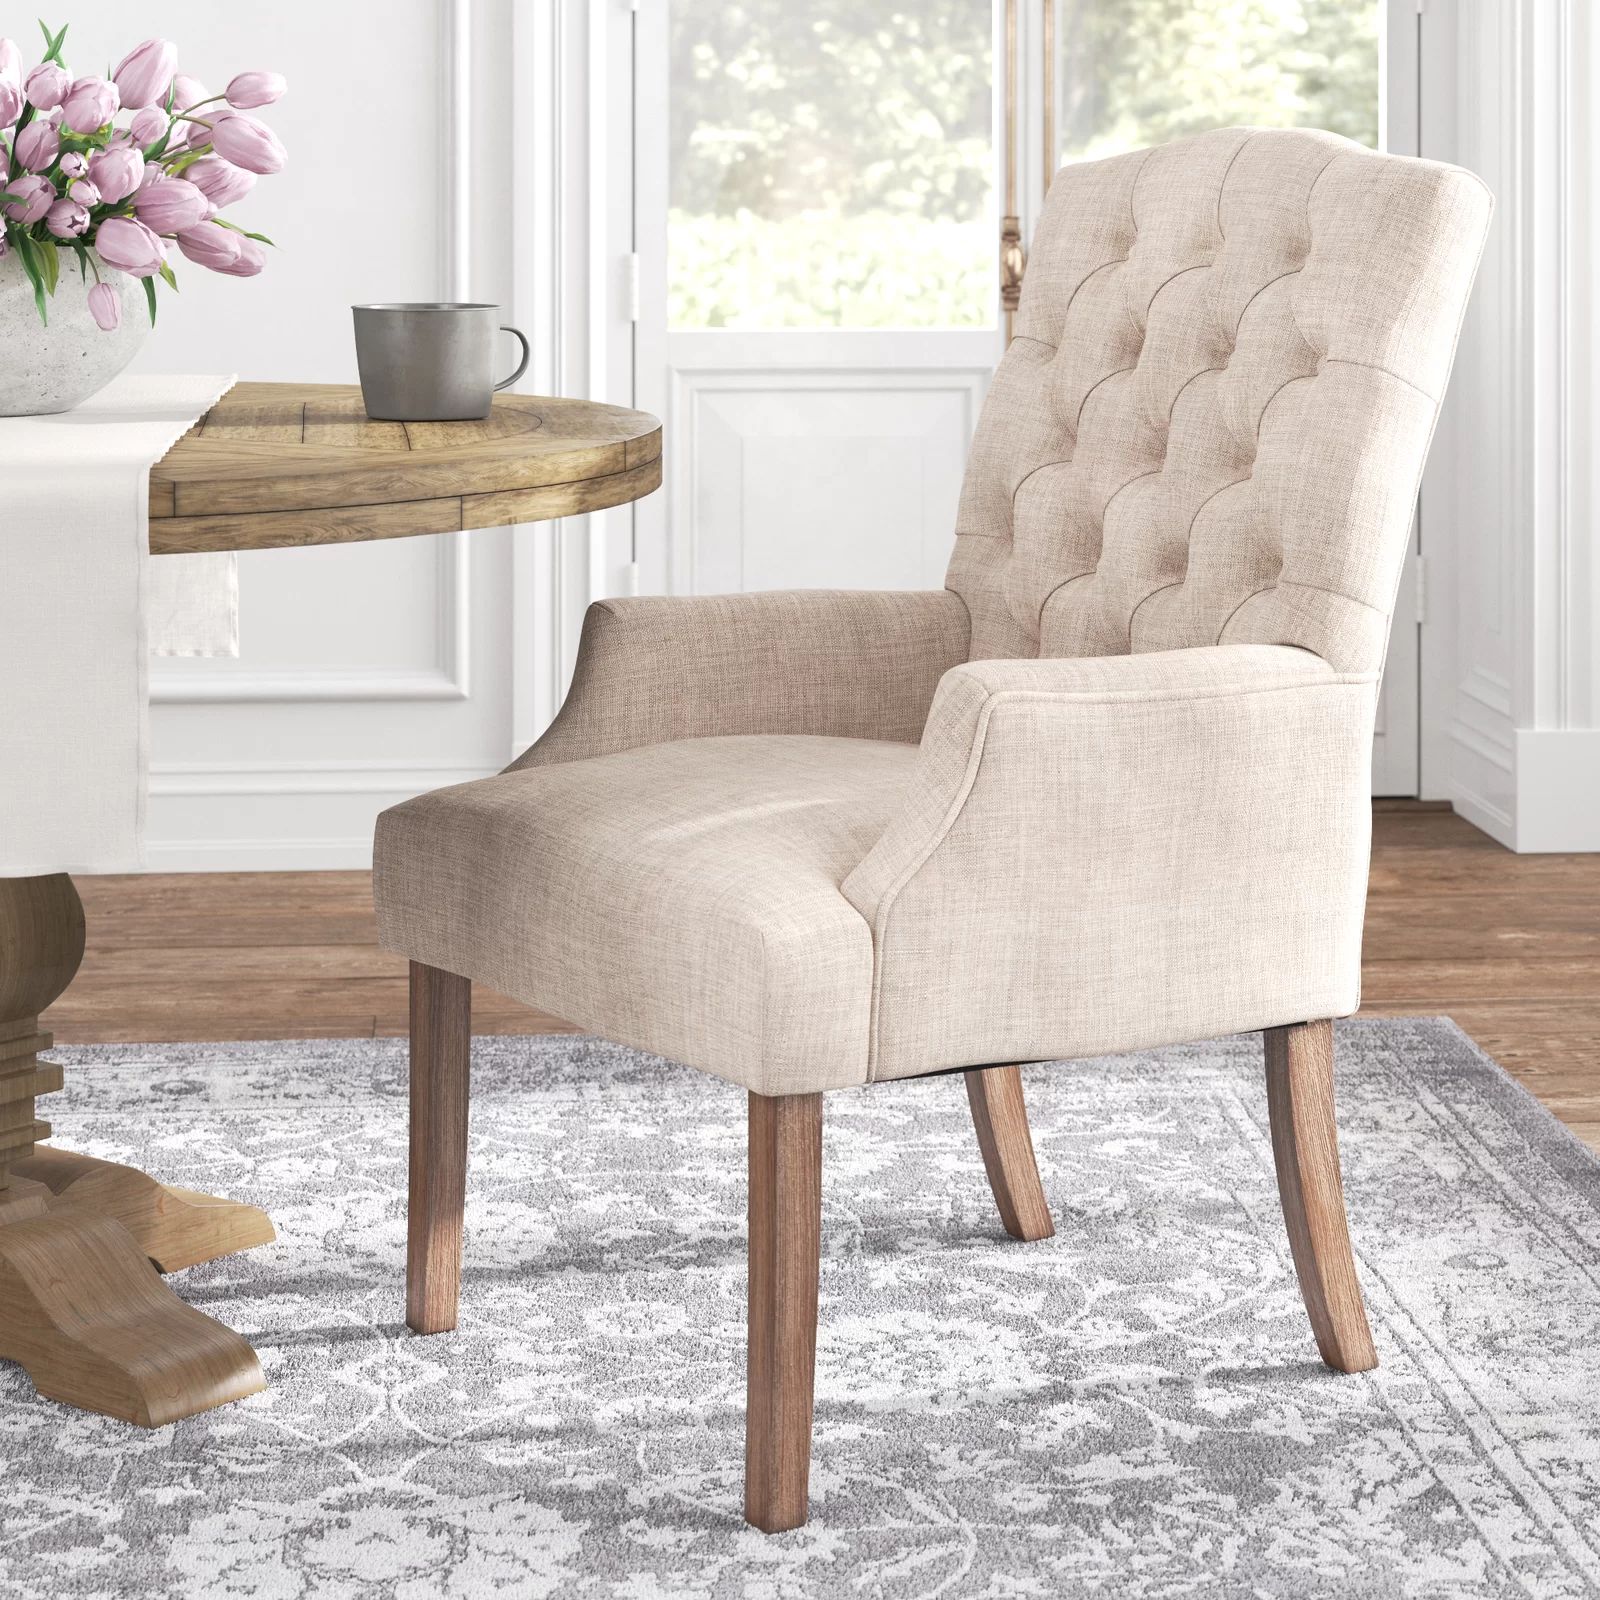 Lila Tufted Linen Upholstered Arm Chair | Wayfair North America